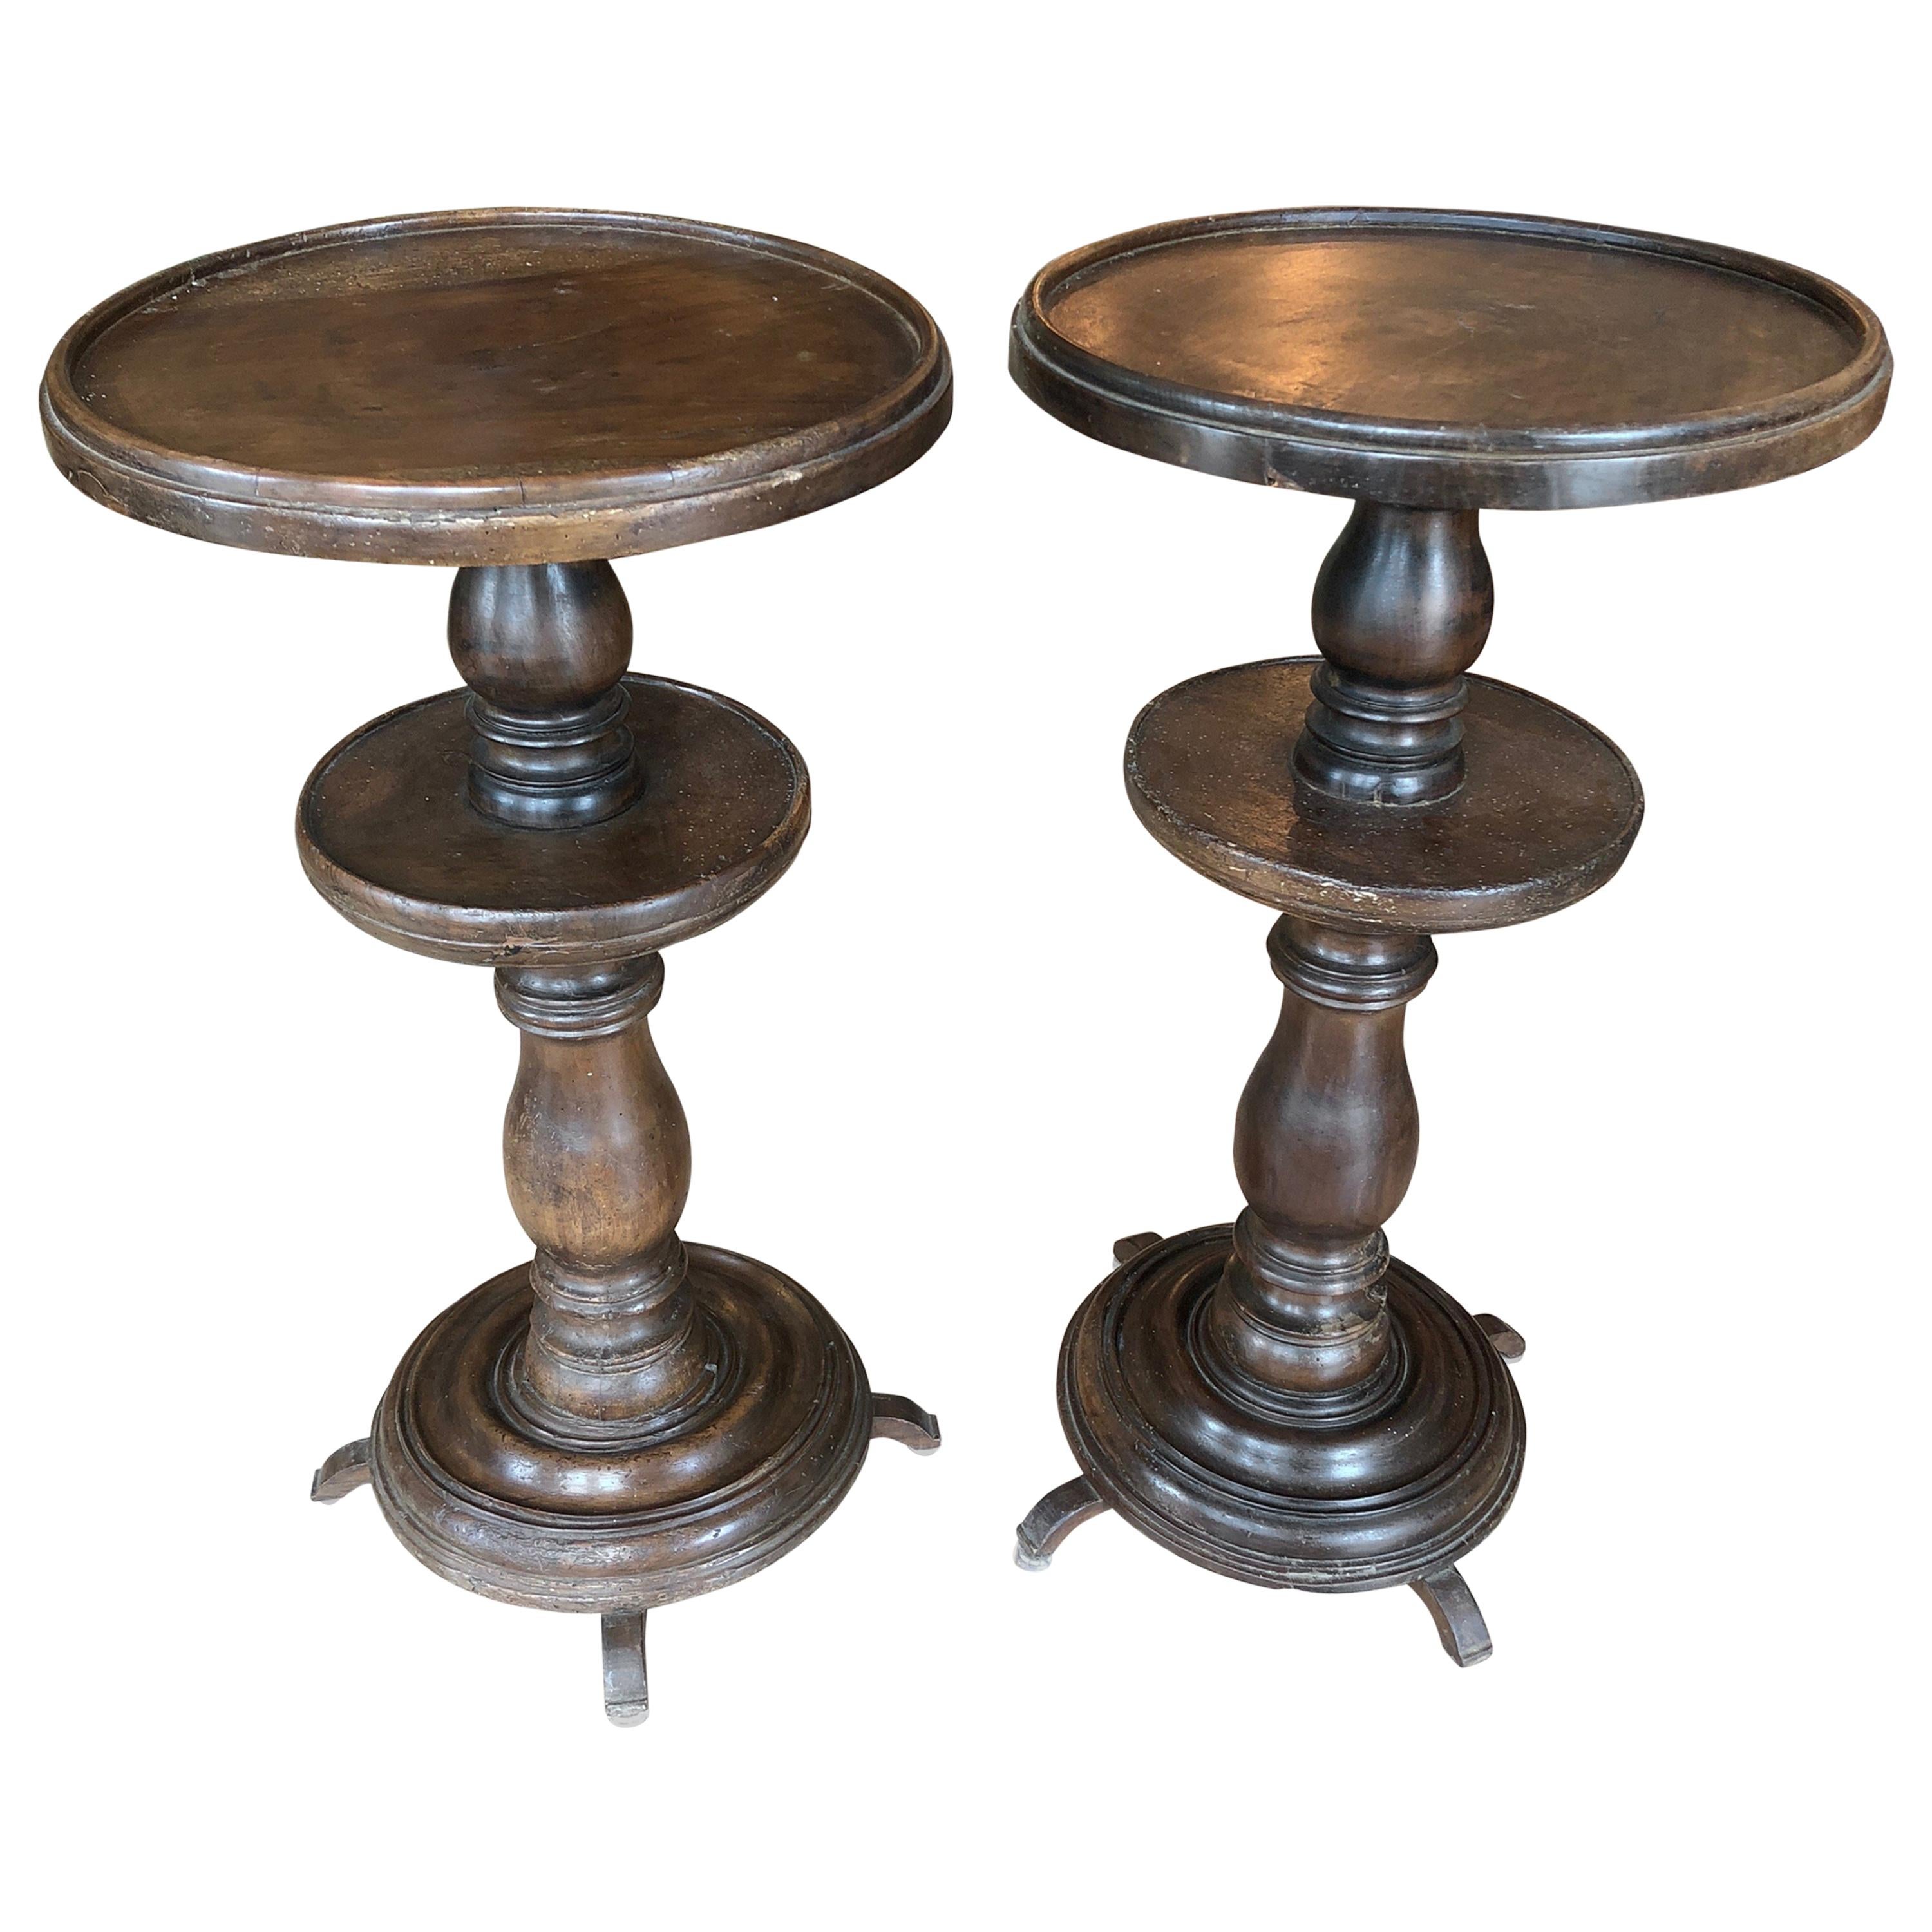 Pair of Handsome Very Unusual French Walnut Turned Side Tables Pedestals